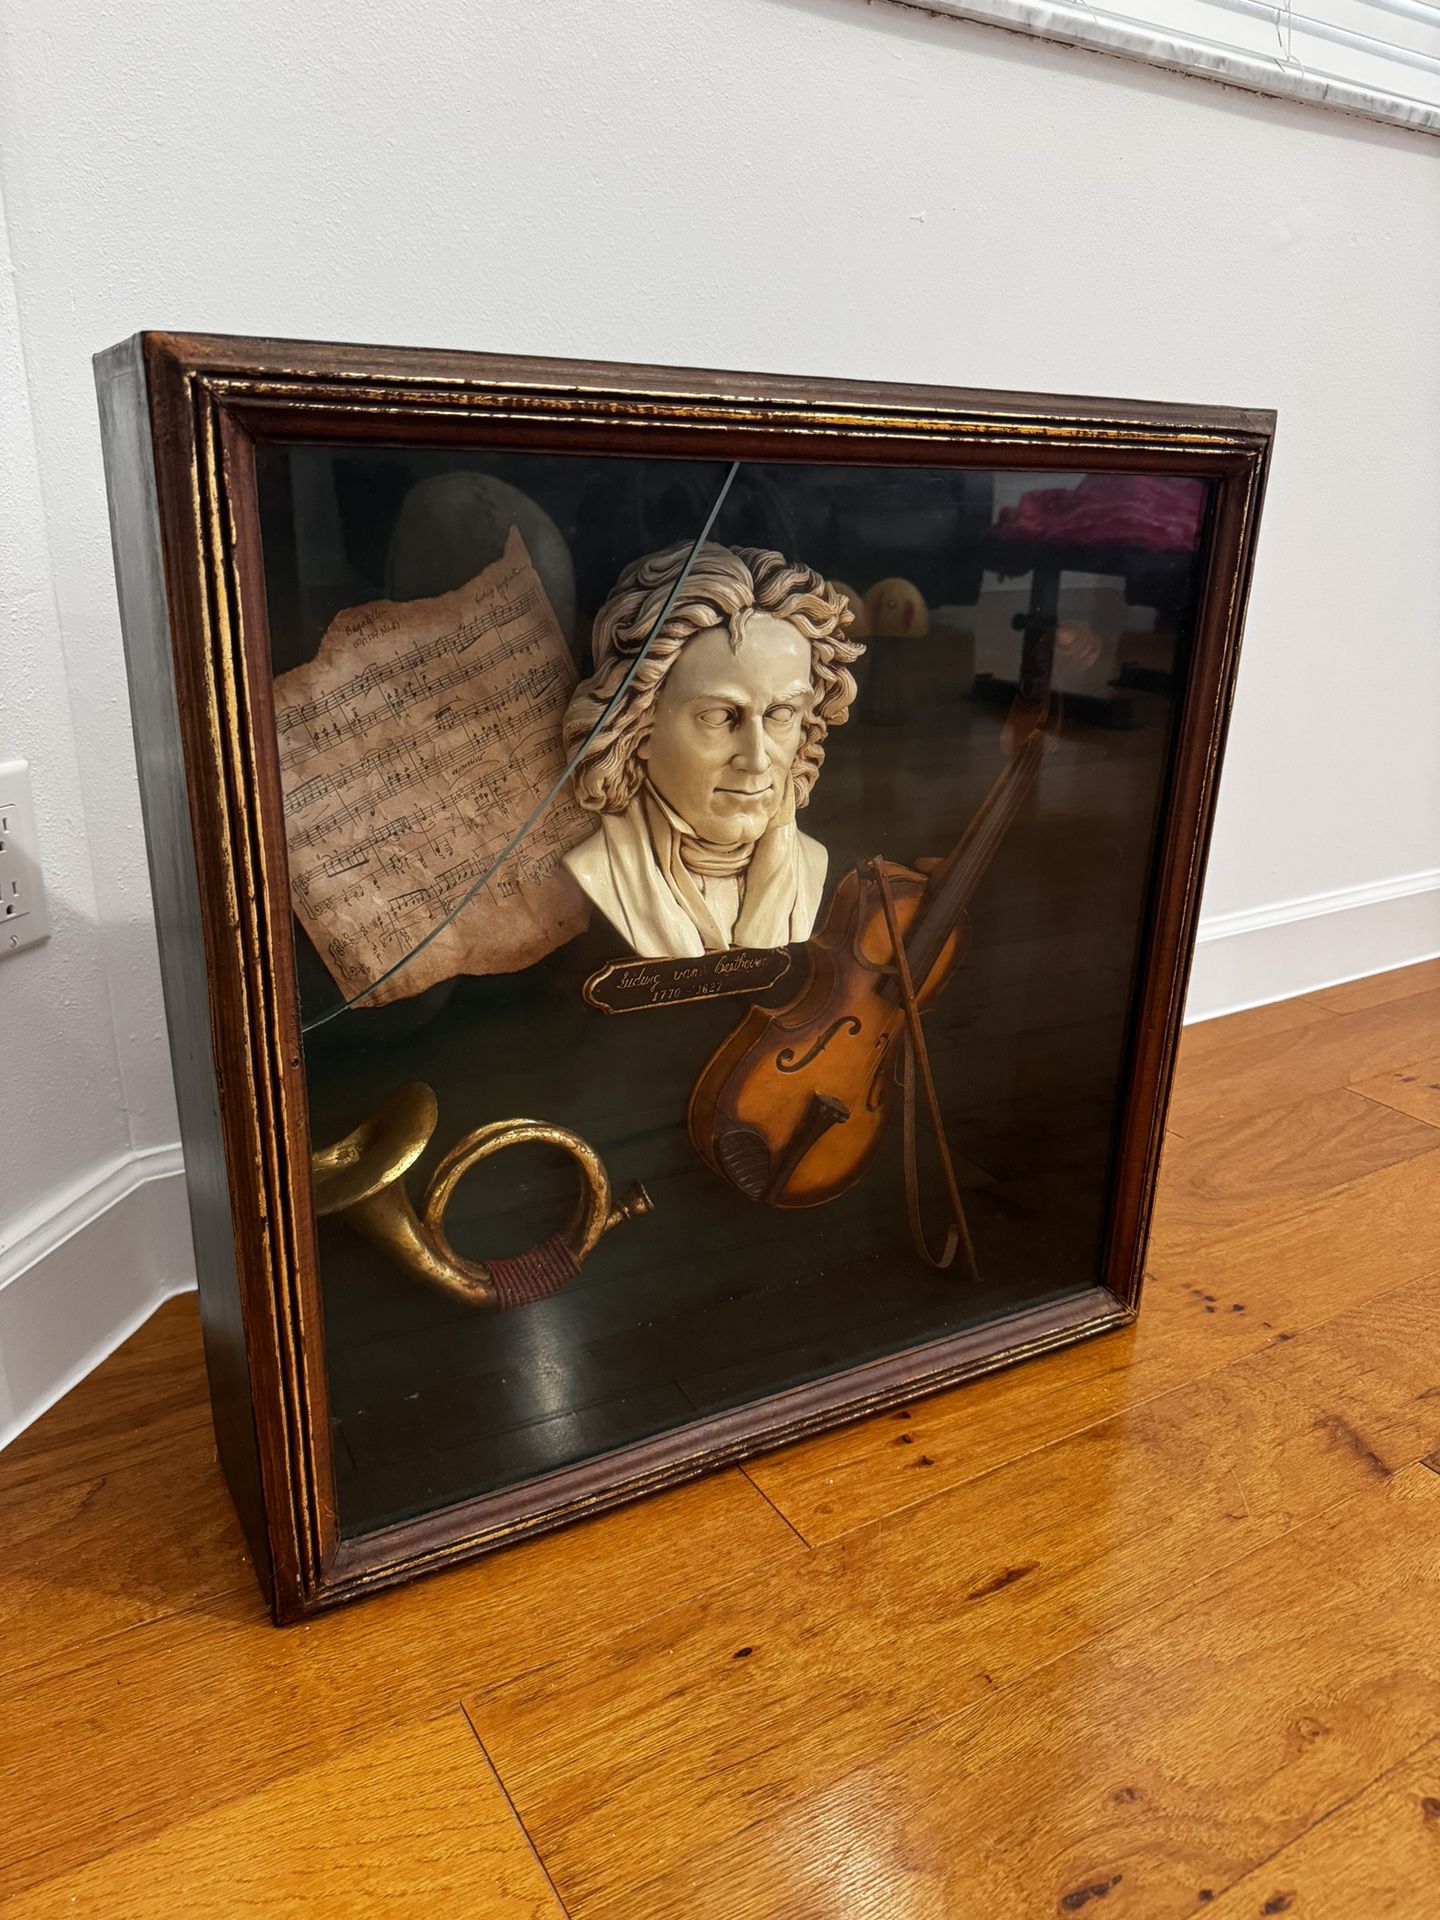 RARE vintage beethoven memorabilia collectible display  Glass has crack, but can be replaced  Heavy & collectible Measures 2 feet by 2 feet   Pick up 